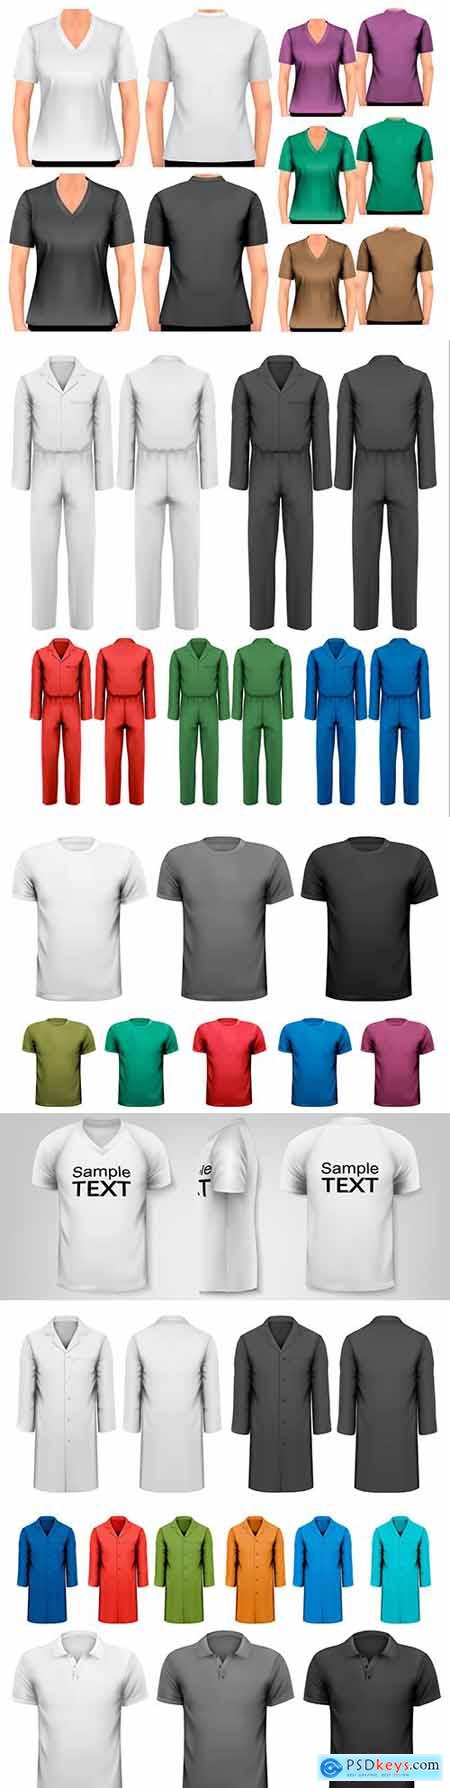 Black and white and colored mens T-shirts and workwear